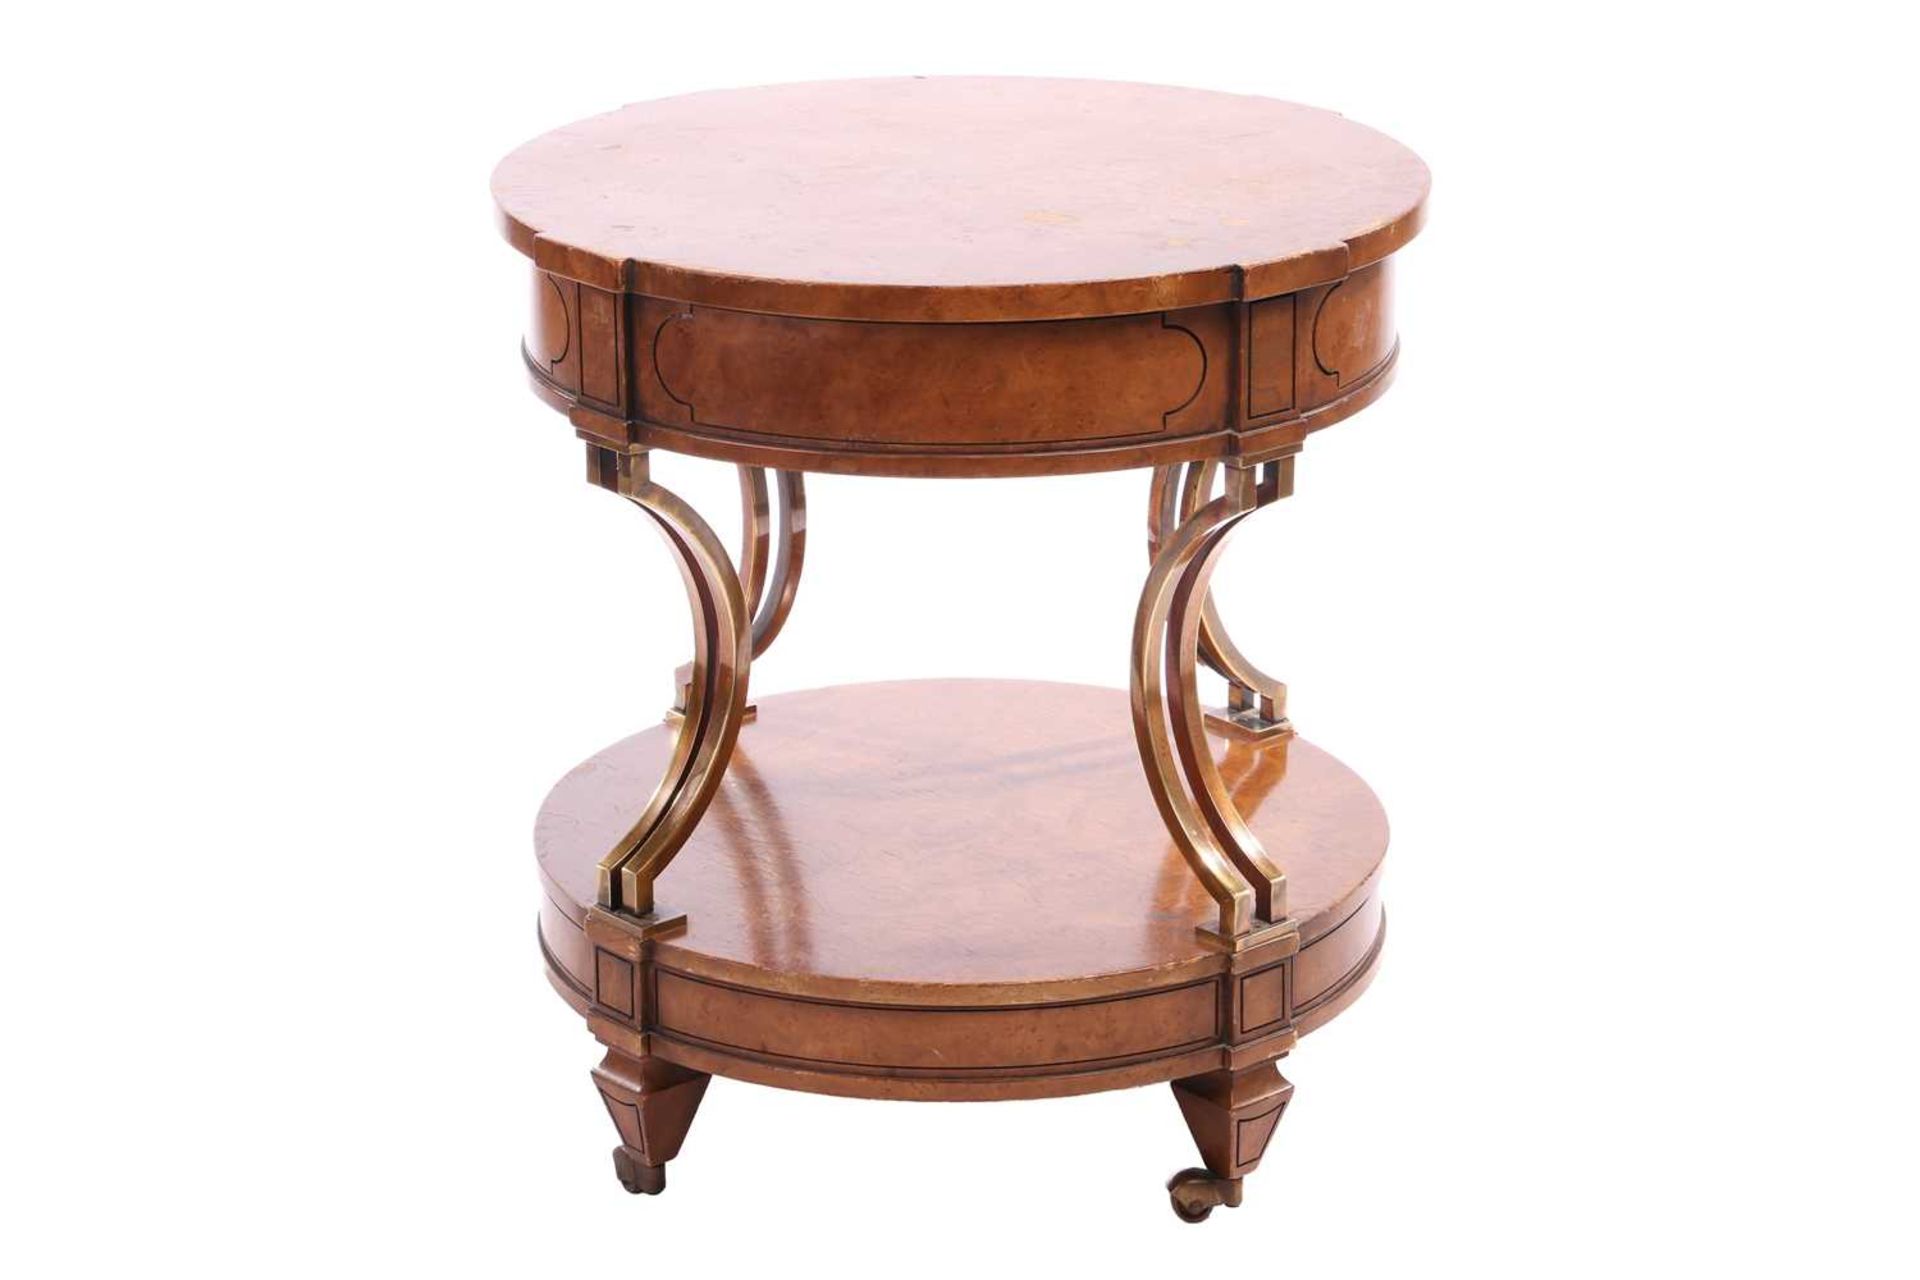 A French Empire-style two-tier drum burr walnut table with concave gilt brass supports over a confor - Image 3 of 10